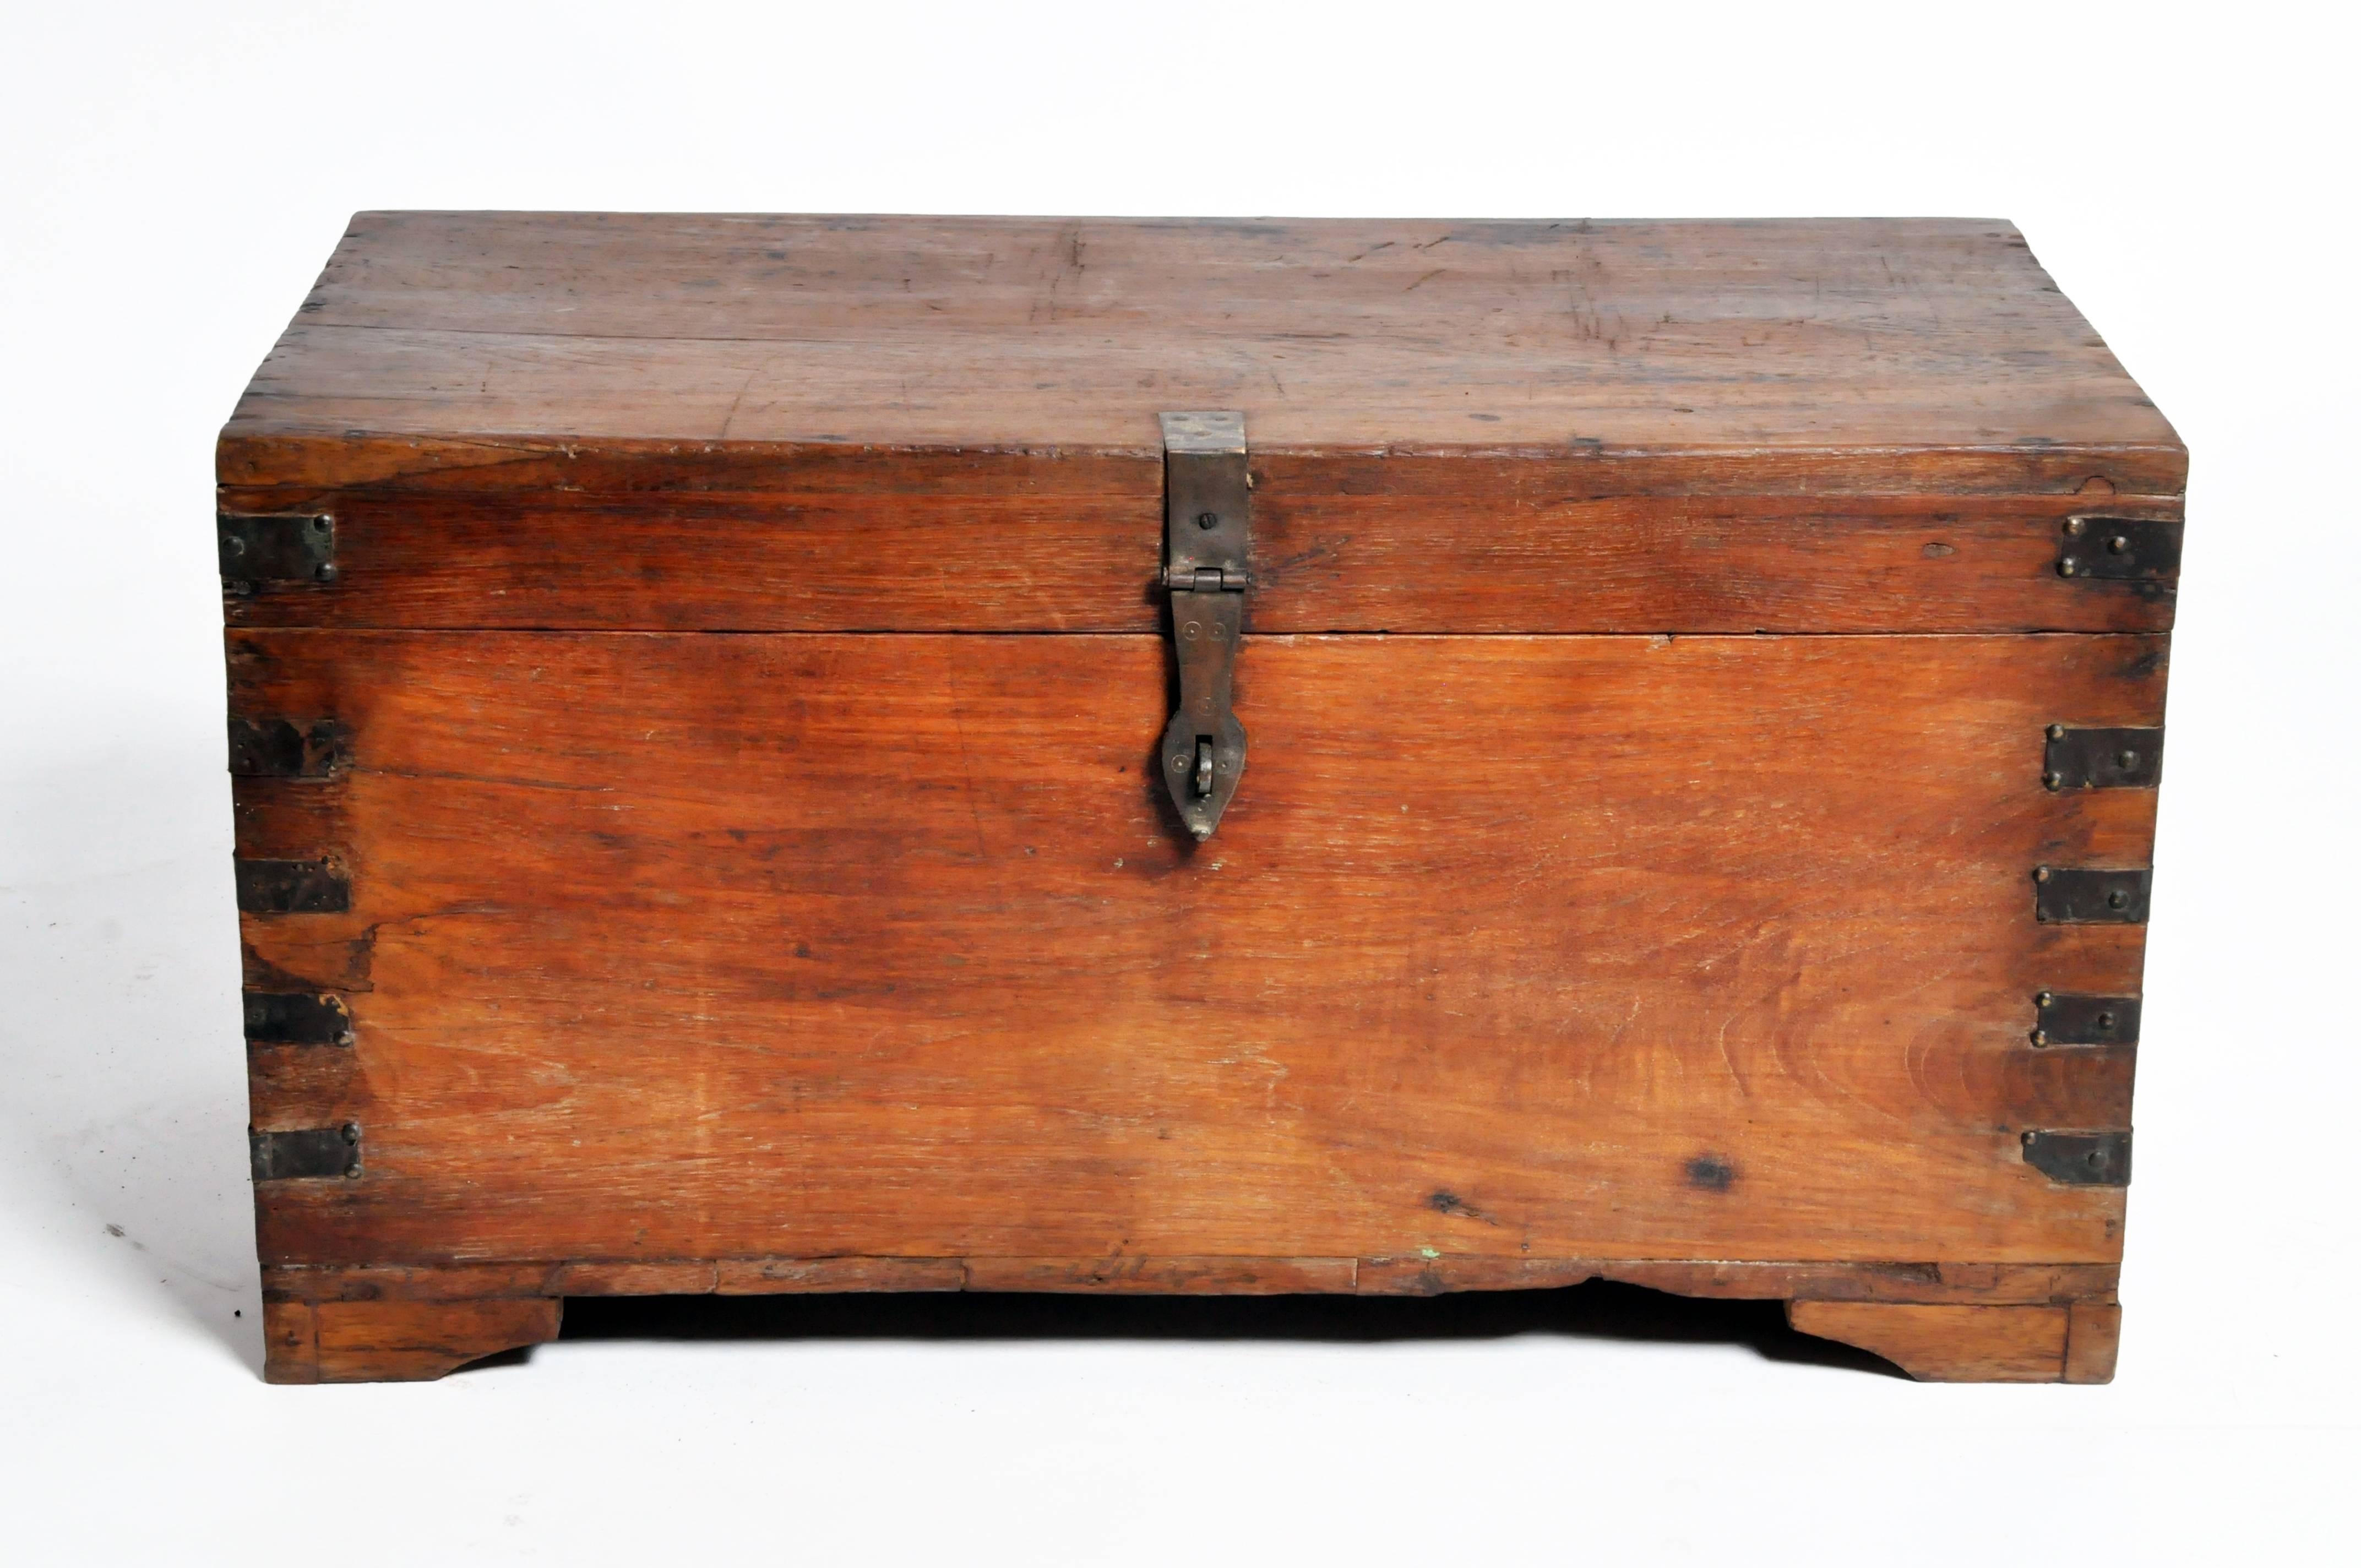 This storage box is from Gujarat, India and was made from teak wood and hand-forged iron branding, circa 1940.